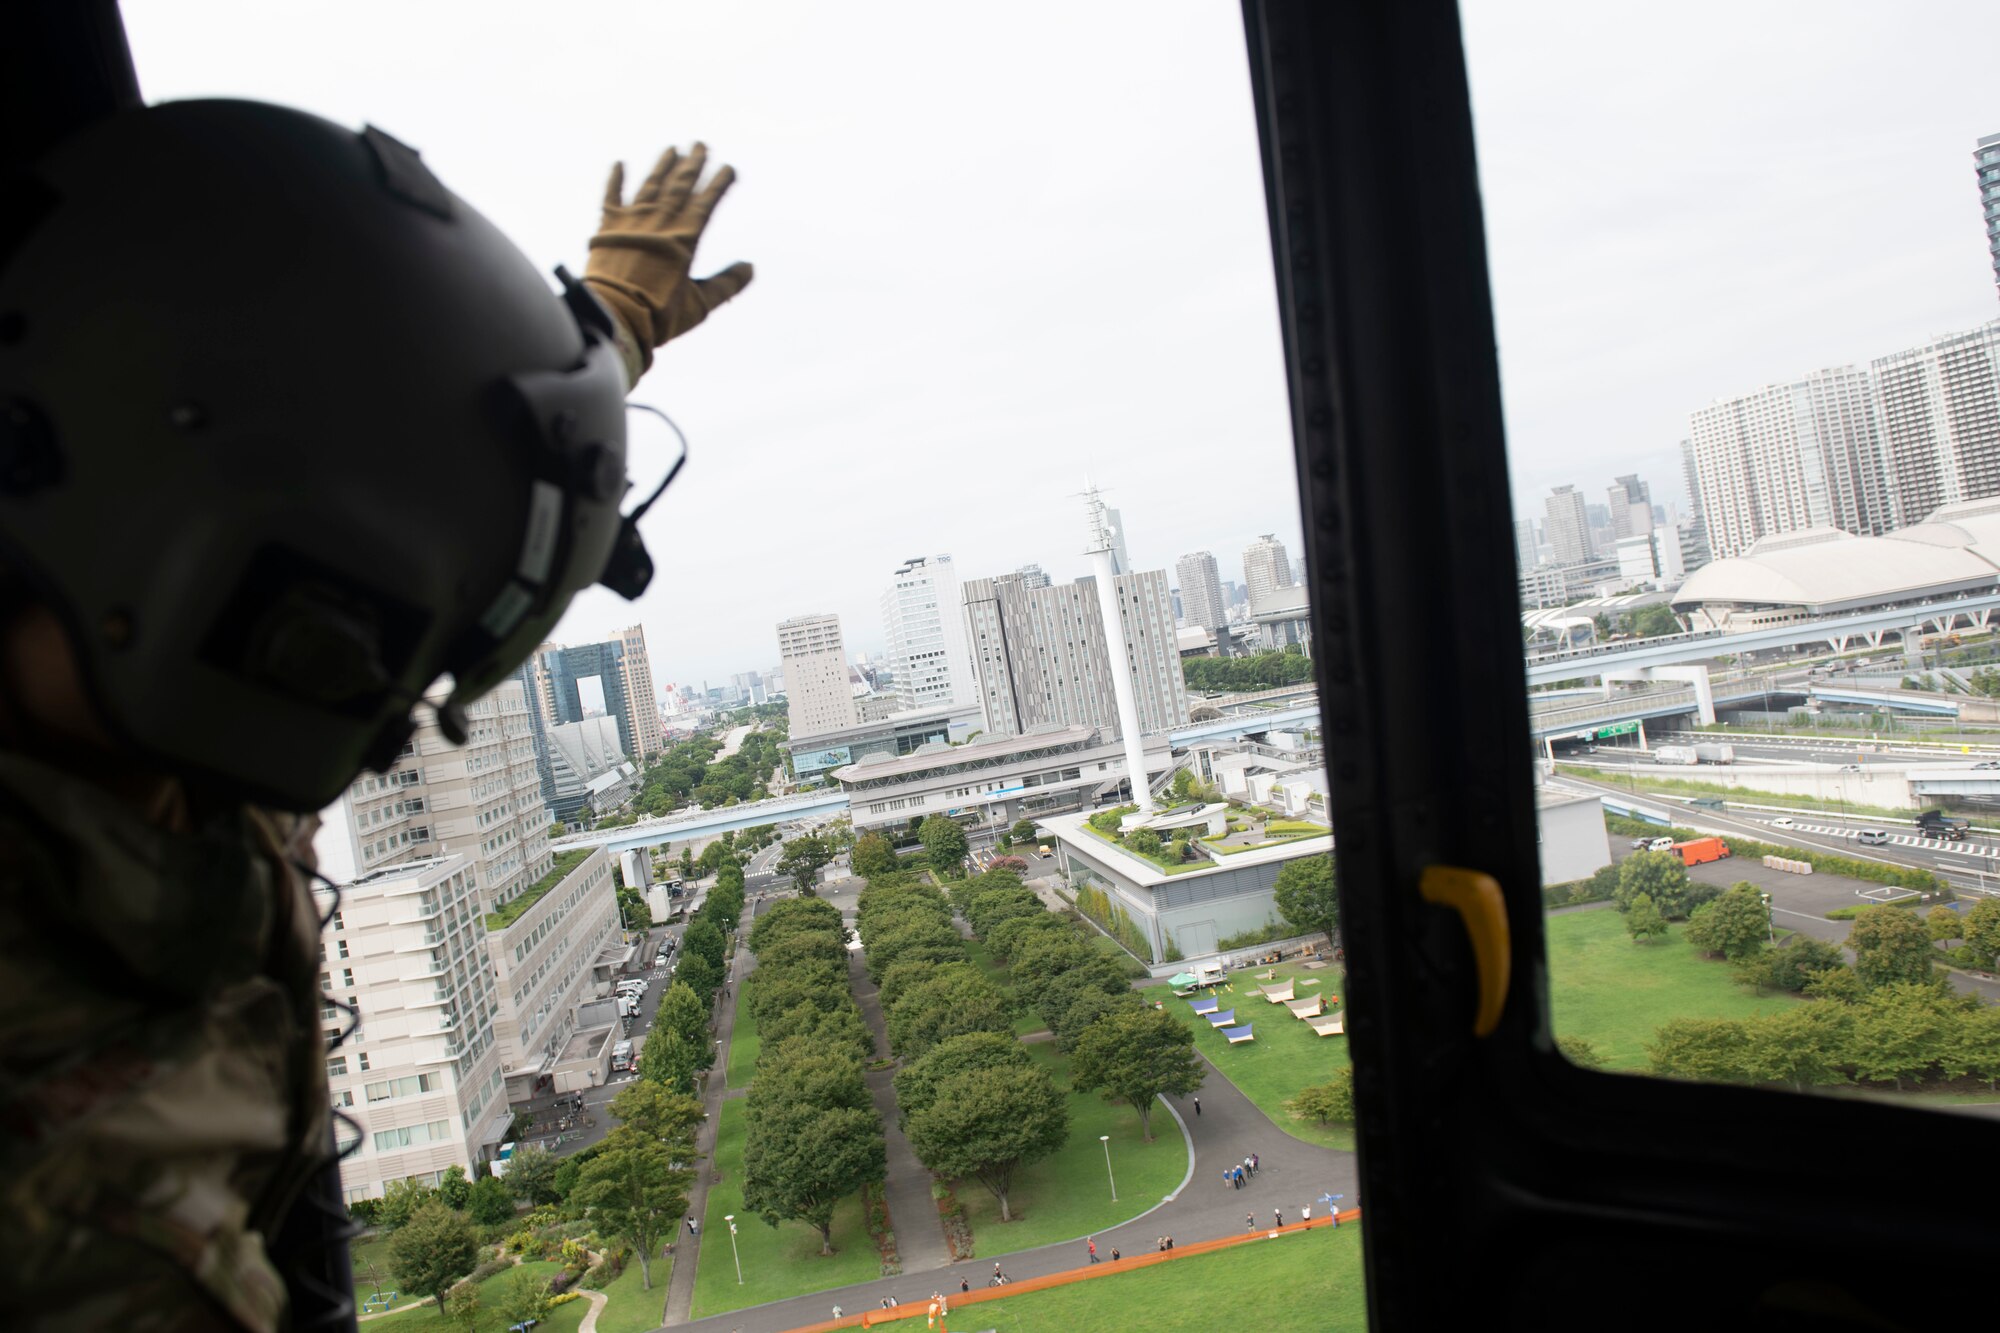 Tech. Sgt. Alexandra Vidato, 459th Airlift Squadron instructor flight engineer, waves goodbye after delivering simulated humanitarian aid during a Tokyo Metropolitan Government hosted disaster preparedness and response drill at Tokyo Rinkai Disaster Prevention Park, Japan, Sept. 3, 2022. The U.S. Army and Navy, as well as the Japan Air Self-Defense Force, participated alongside the 459th AS to ensure mission readiness in the event of a real-world disaster. (U.S. Air Force photo by Tech. Sgt. Joshua Edwards)